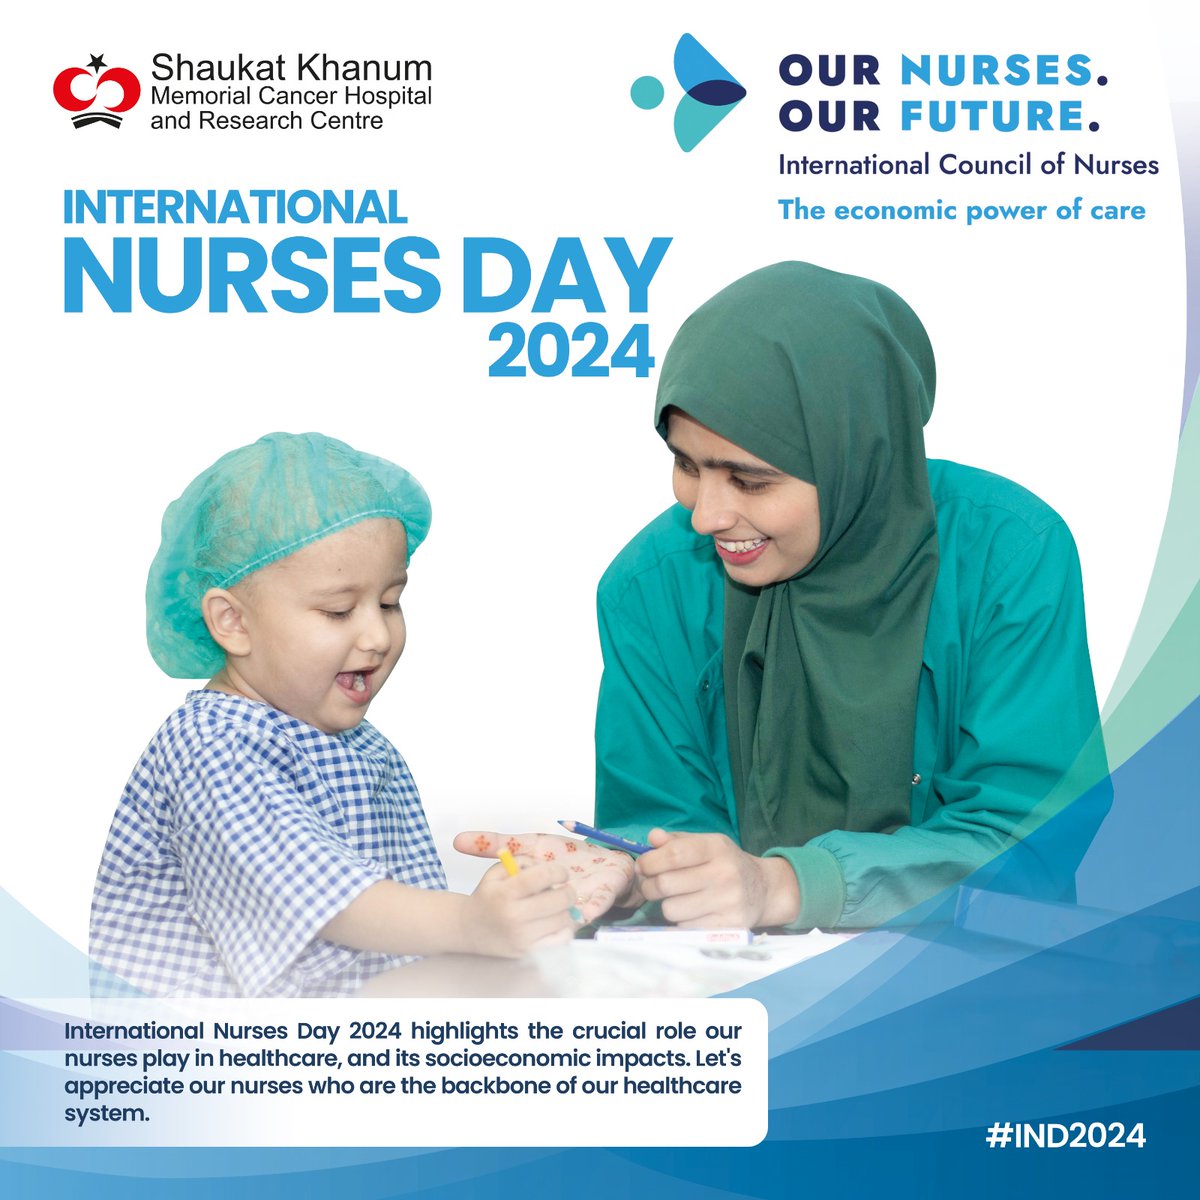 Every year on May 12, we celebrate International Nurses Day. This year's theme is 'Our Nurses, Our Future; The Economic Power of Care),' which emphasises the crucial role our nurses perform in healthcare and its socioeconomic implications. #OurNursesOurFuture #SKMCH #IND2024